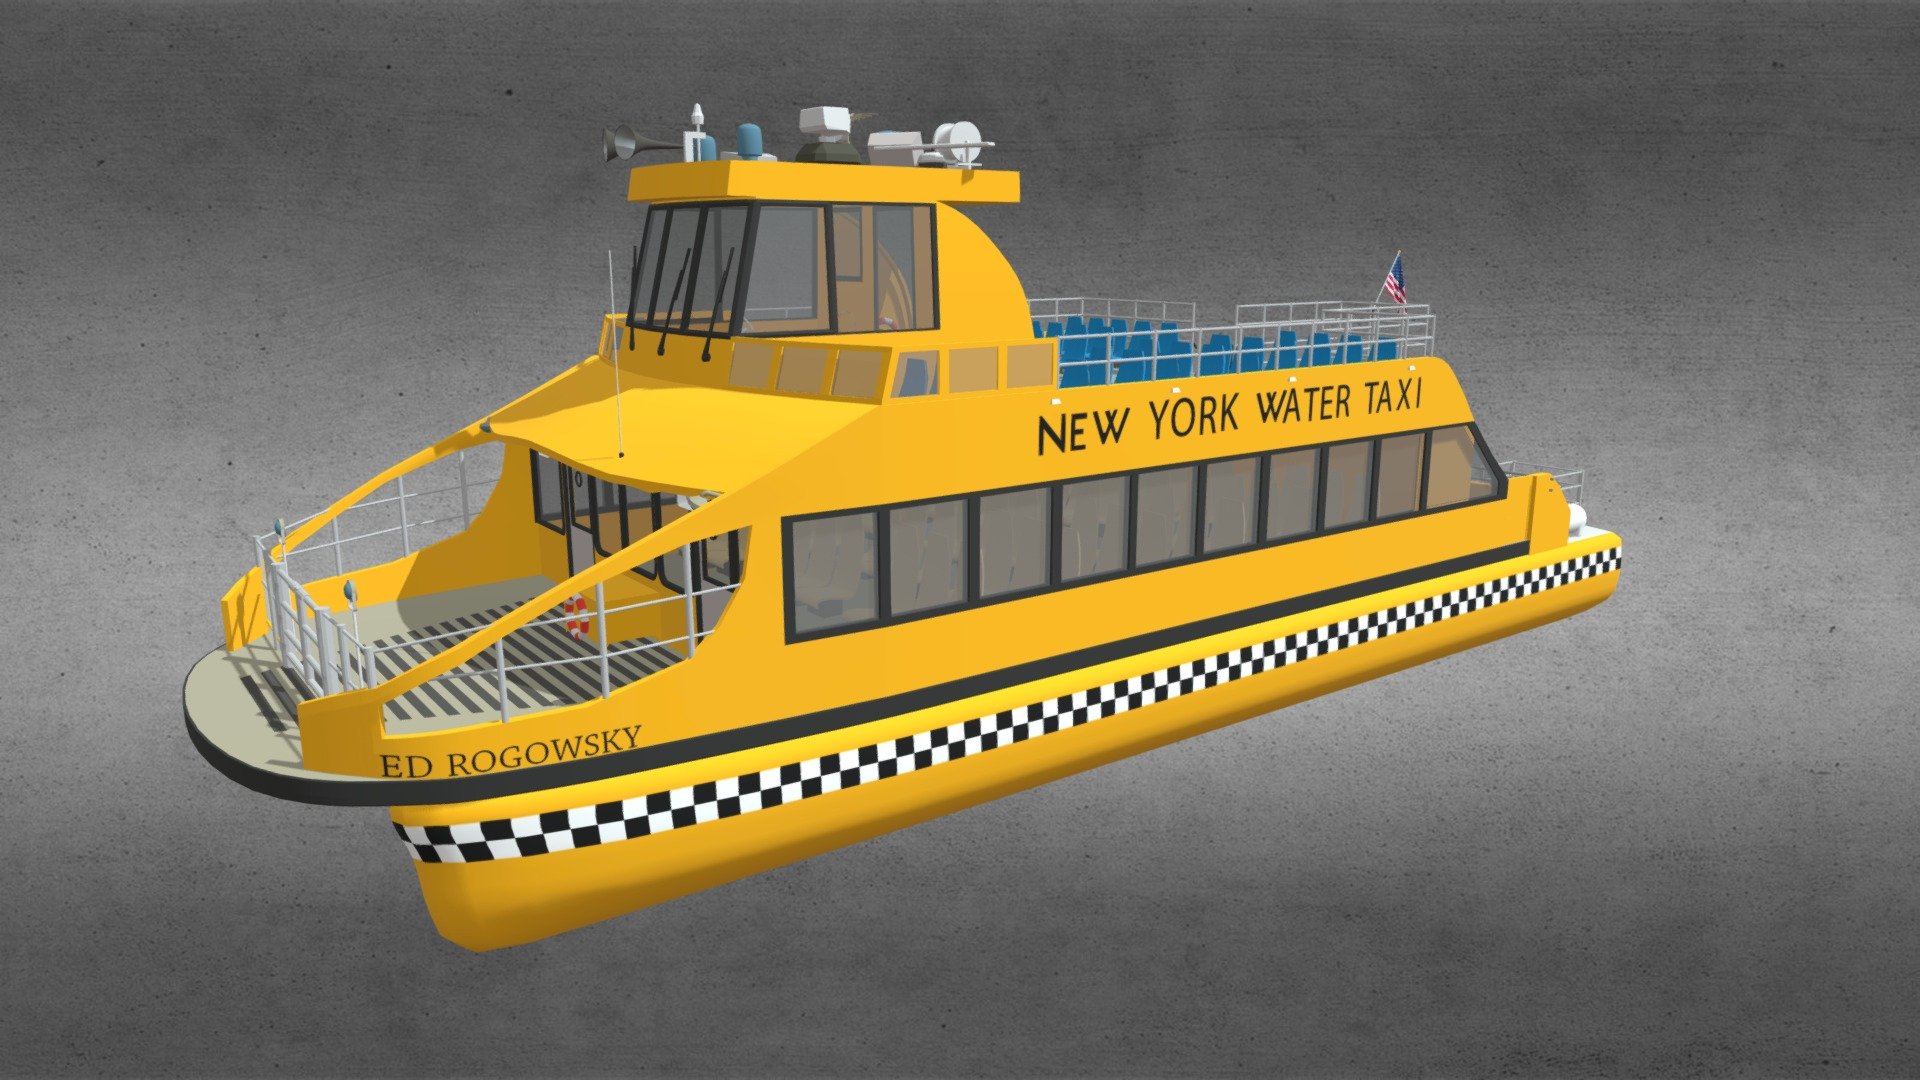 New York Water Taxi 3d model
originally created with 3ds Max 2015 and rendered in Mental Ray.

Total Poly Counts:
Poly Count = 46922
VertexCount =  49988

Please Visit:
https://nuralam3d.blogspot.com/2022/10/new-york-water-taxi-3d-model.html - New York Water Taxi 3d model - 3D model by nuralam018 3d model